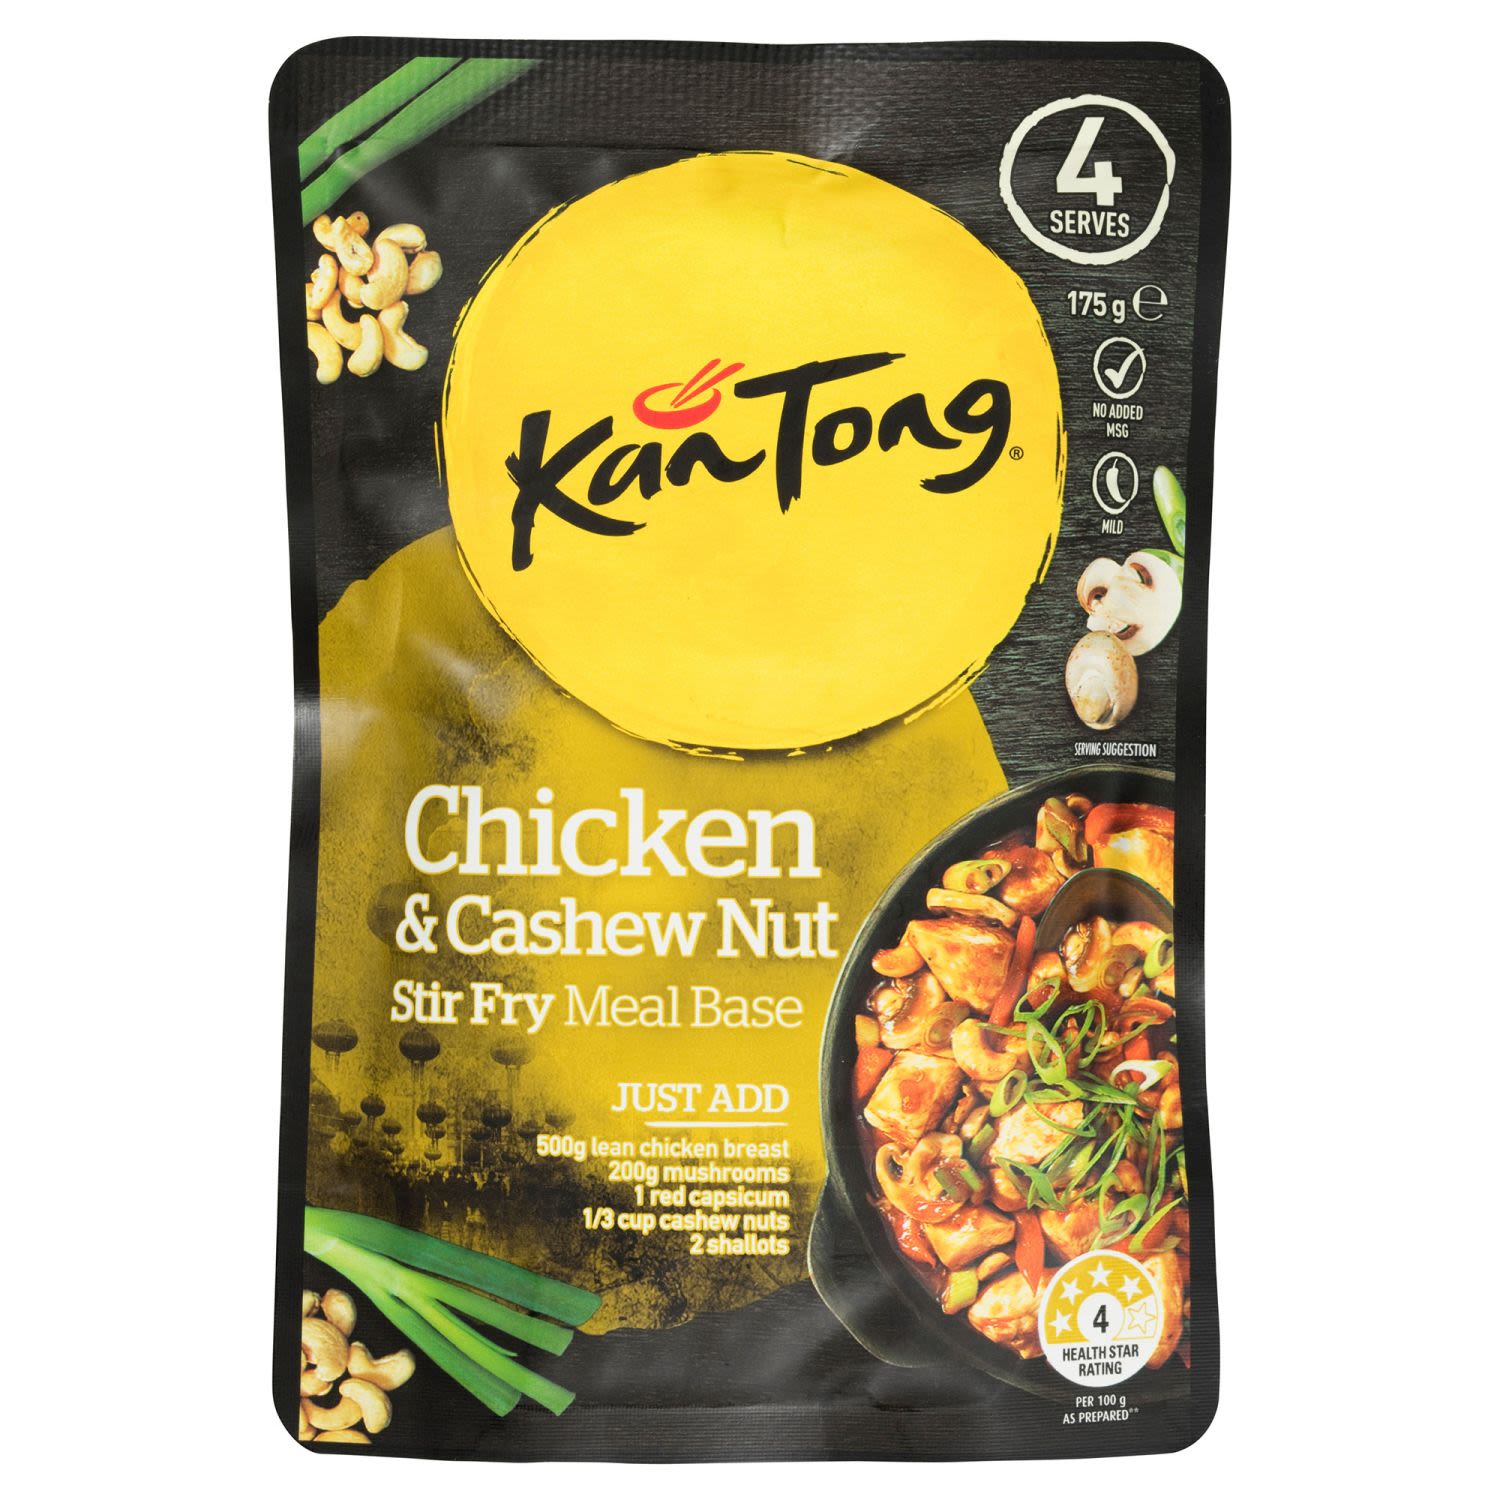 Kan Tong Chicken & Cashew Nut Meal Base Pouch, 175 Gram